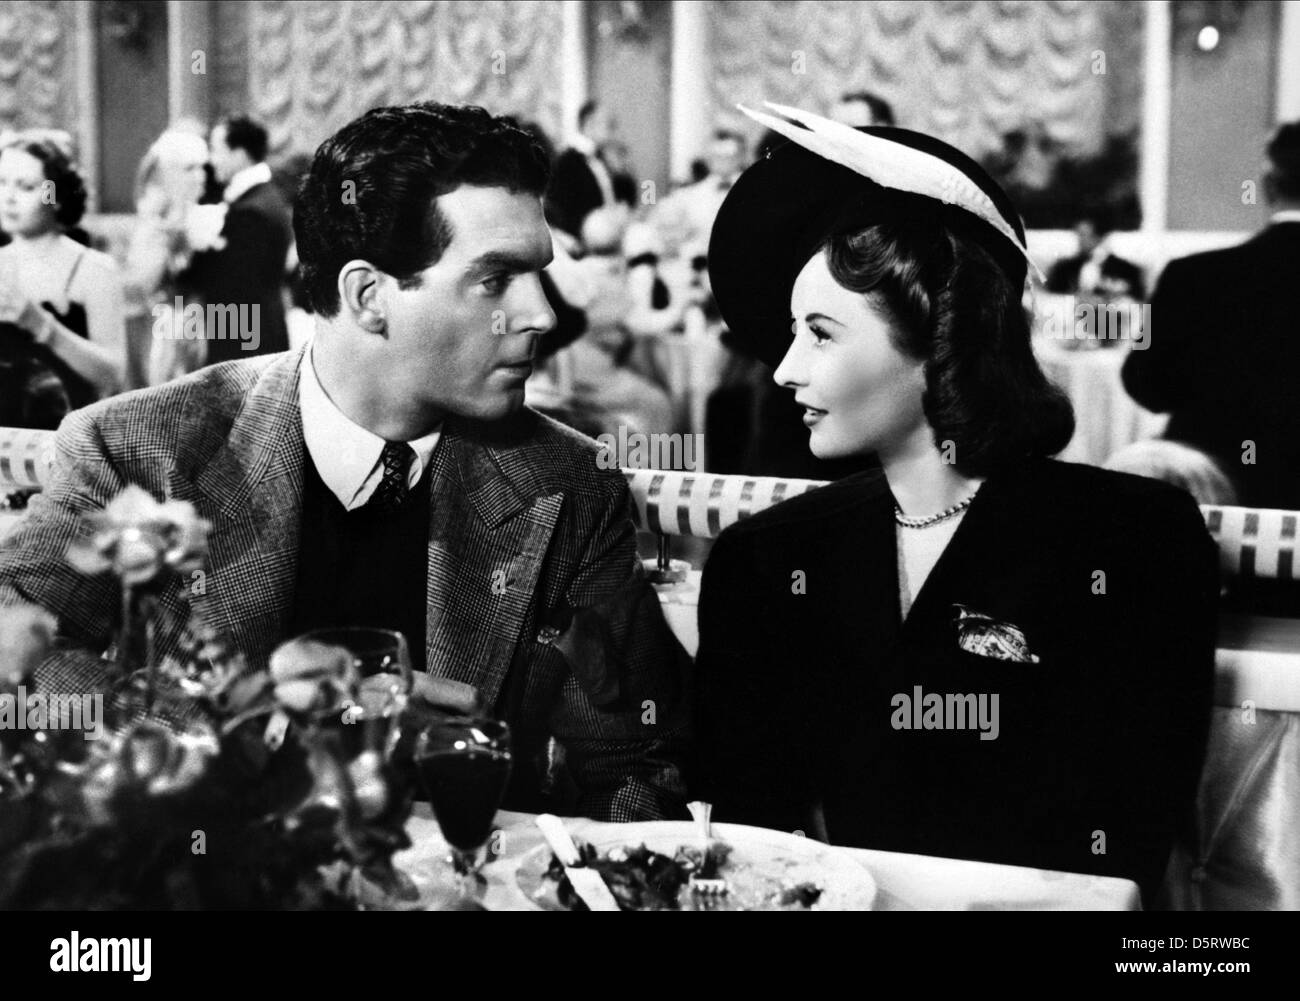 FRED MACMURRAY, Barbara Stanwyck, erinnere mich an die Nacht, 1940 Stockfoto